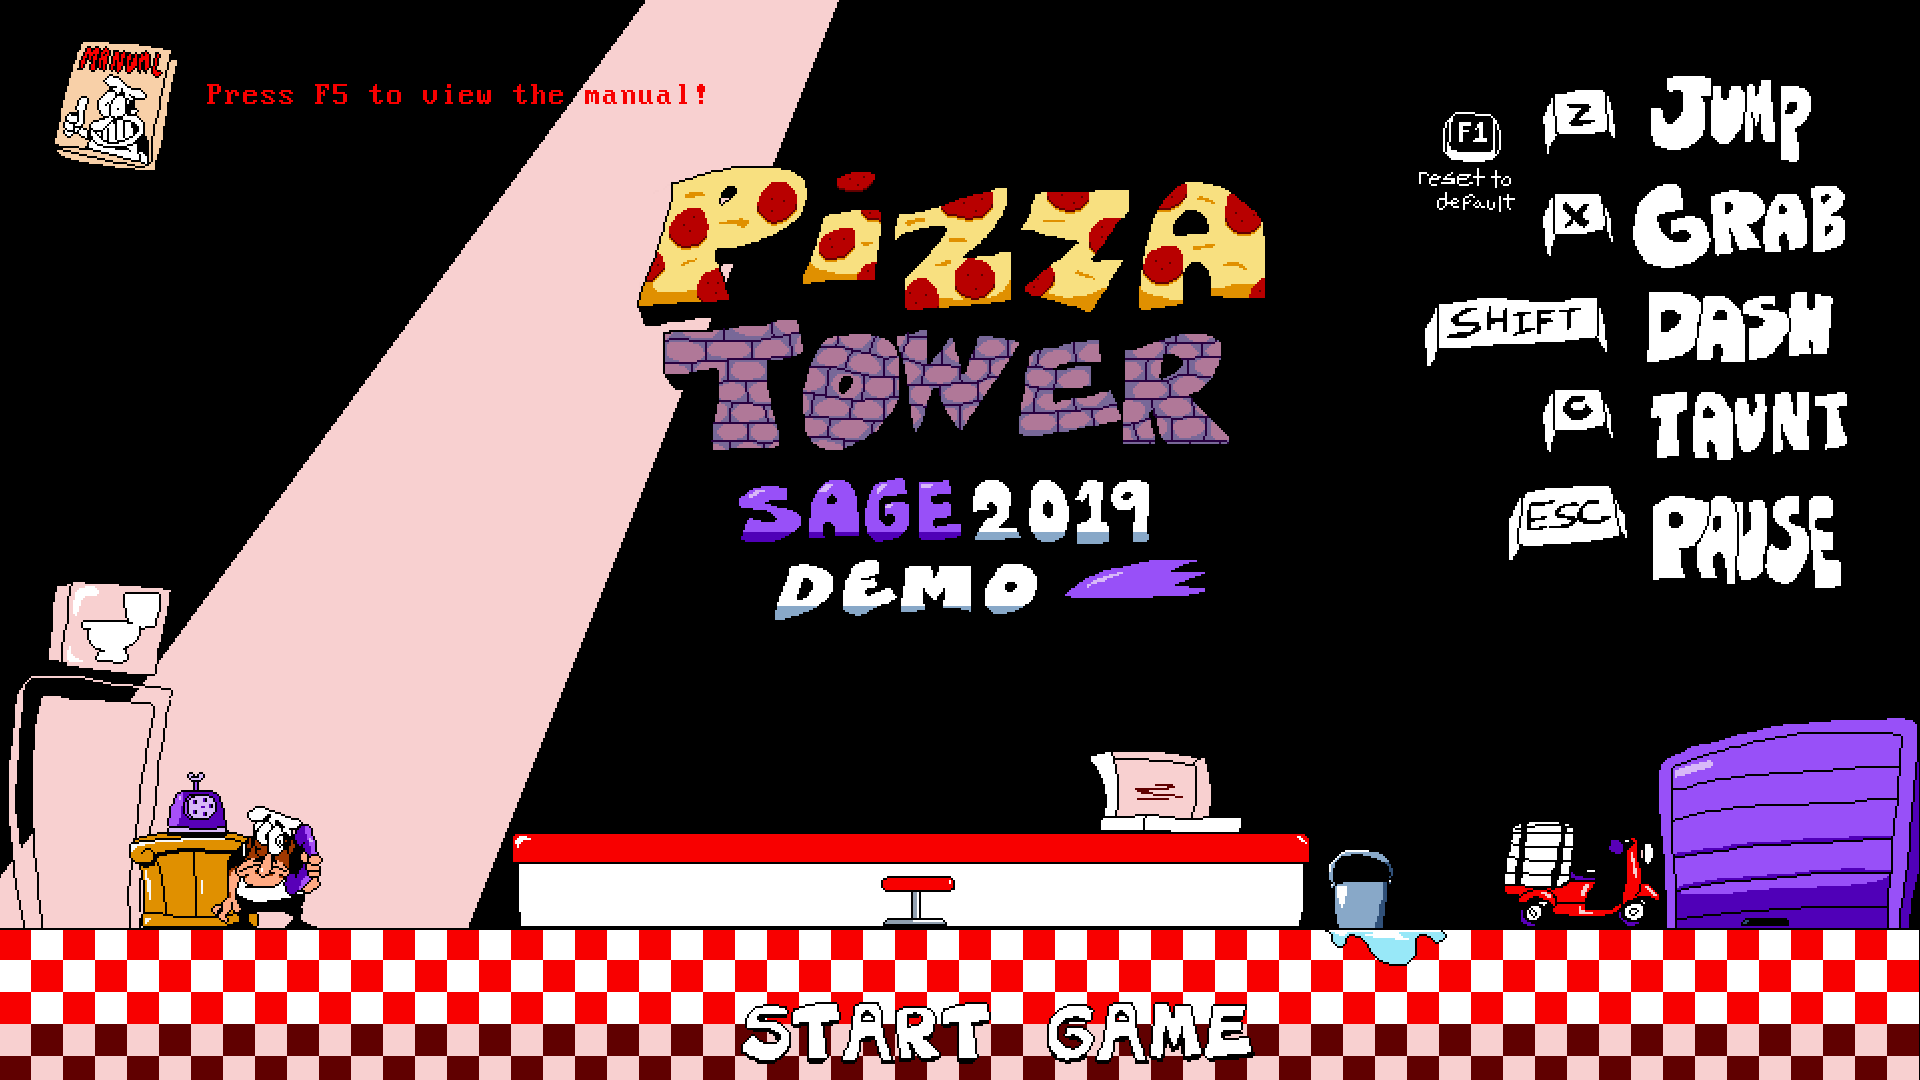 Pizza Tower Sage 2019. Pizza Tower игра. Pizza Tower Sage 2019 Demo. Pizza Tower game Peppino. Нойз пицца тауэр